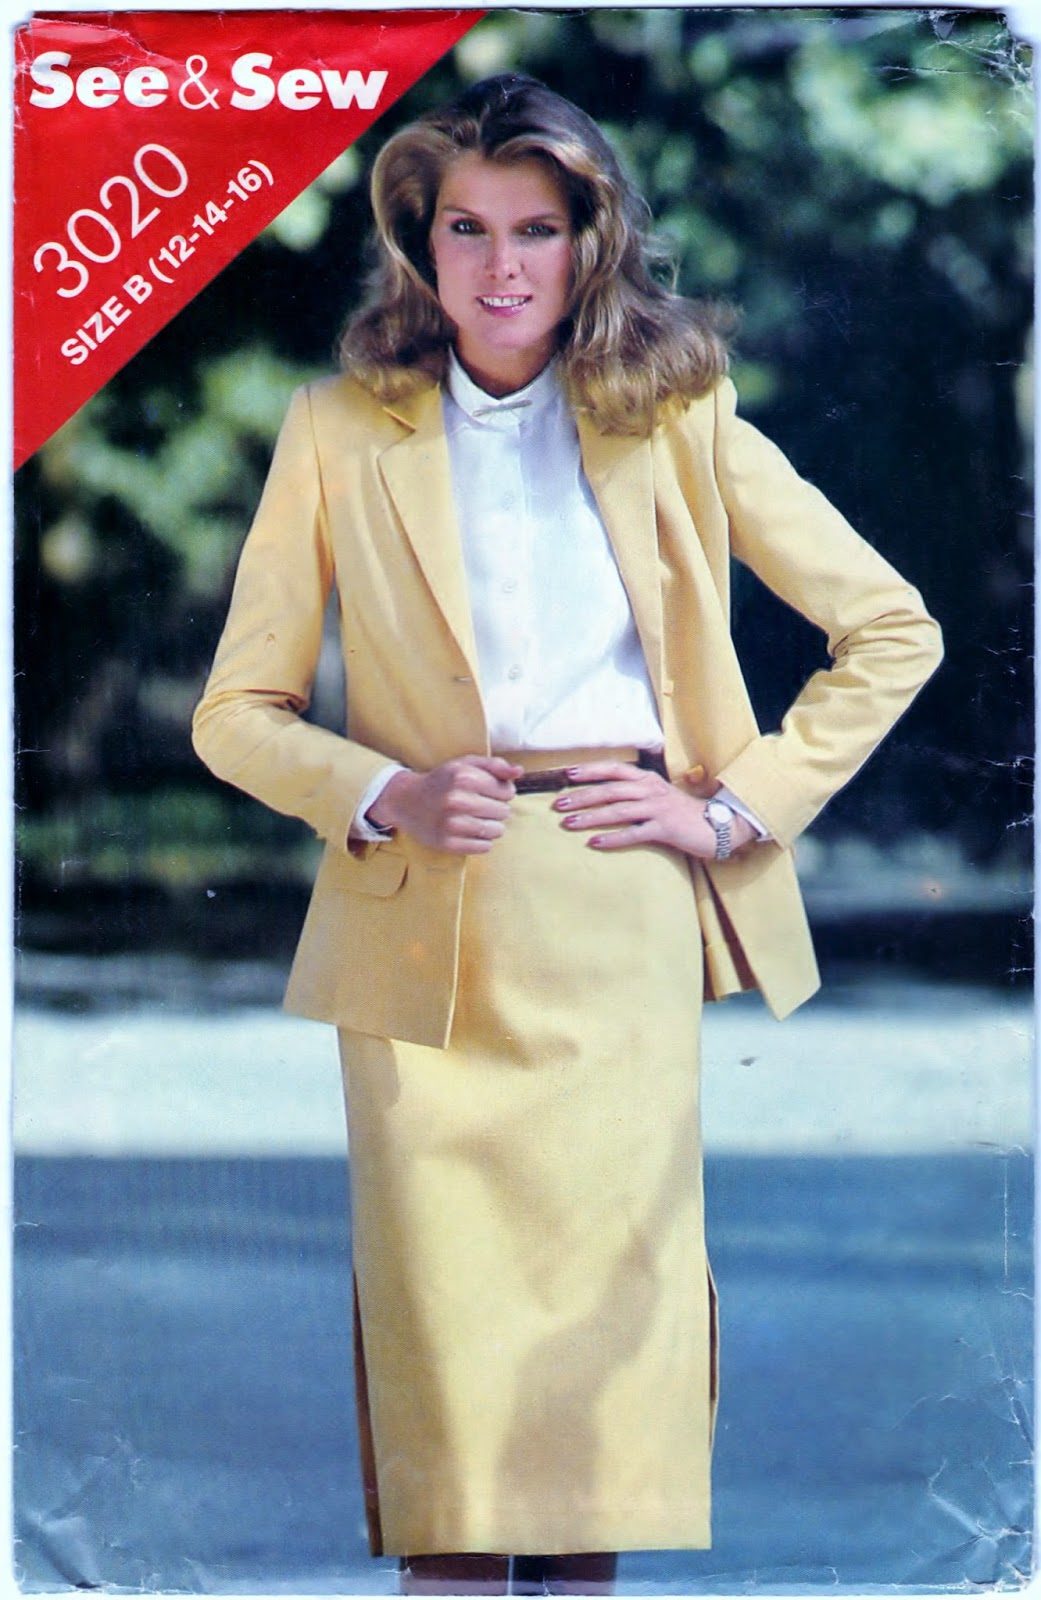 https://www.etsy.com/listing/209727576/butterick-see-and-sew-diy-sewing-craft